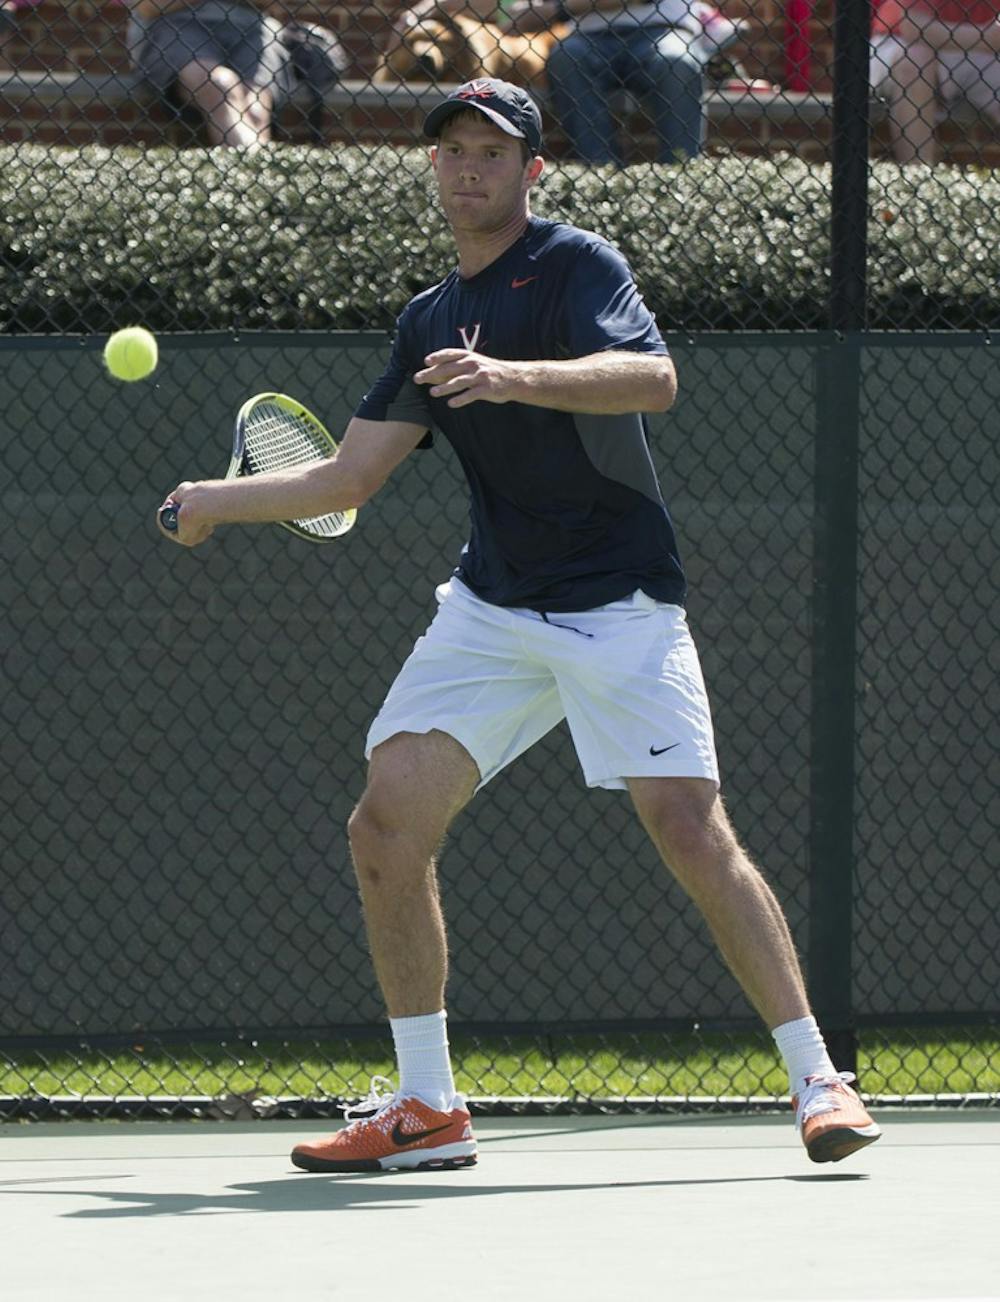 Virginia captain senior Mitchell Frank is one of eight Cavaliers set to compete in the Dallas Challenger. The pro-level event is part of the ATP Challenger Tour, and Virginia's participants will likely be made to play through qualifiers for a spot in the main draw. 